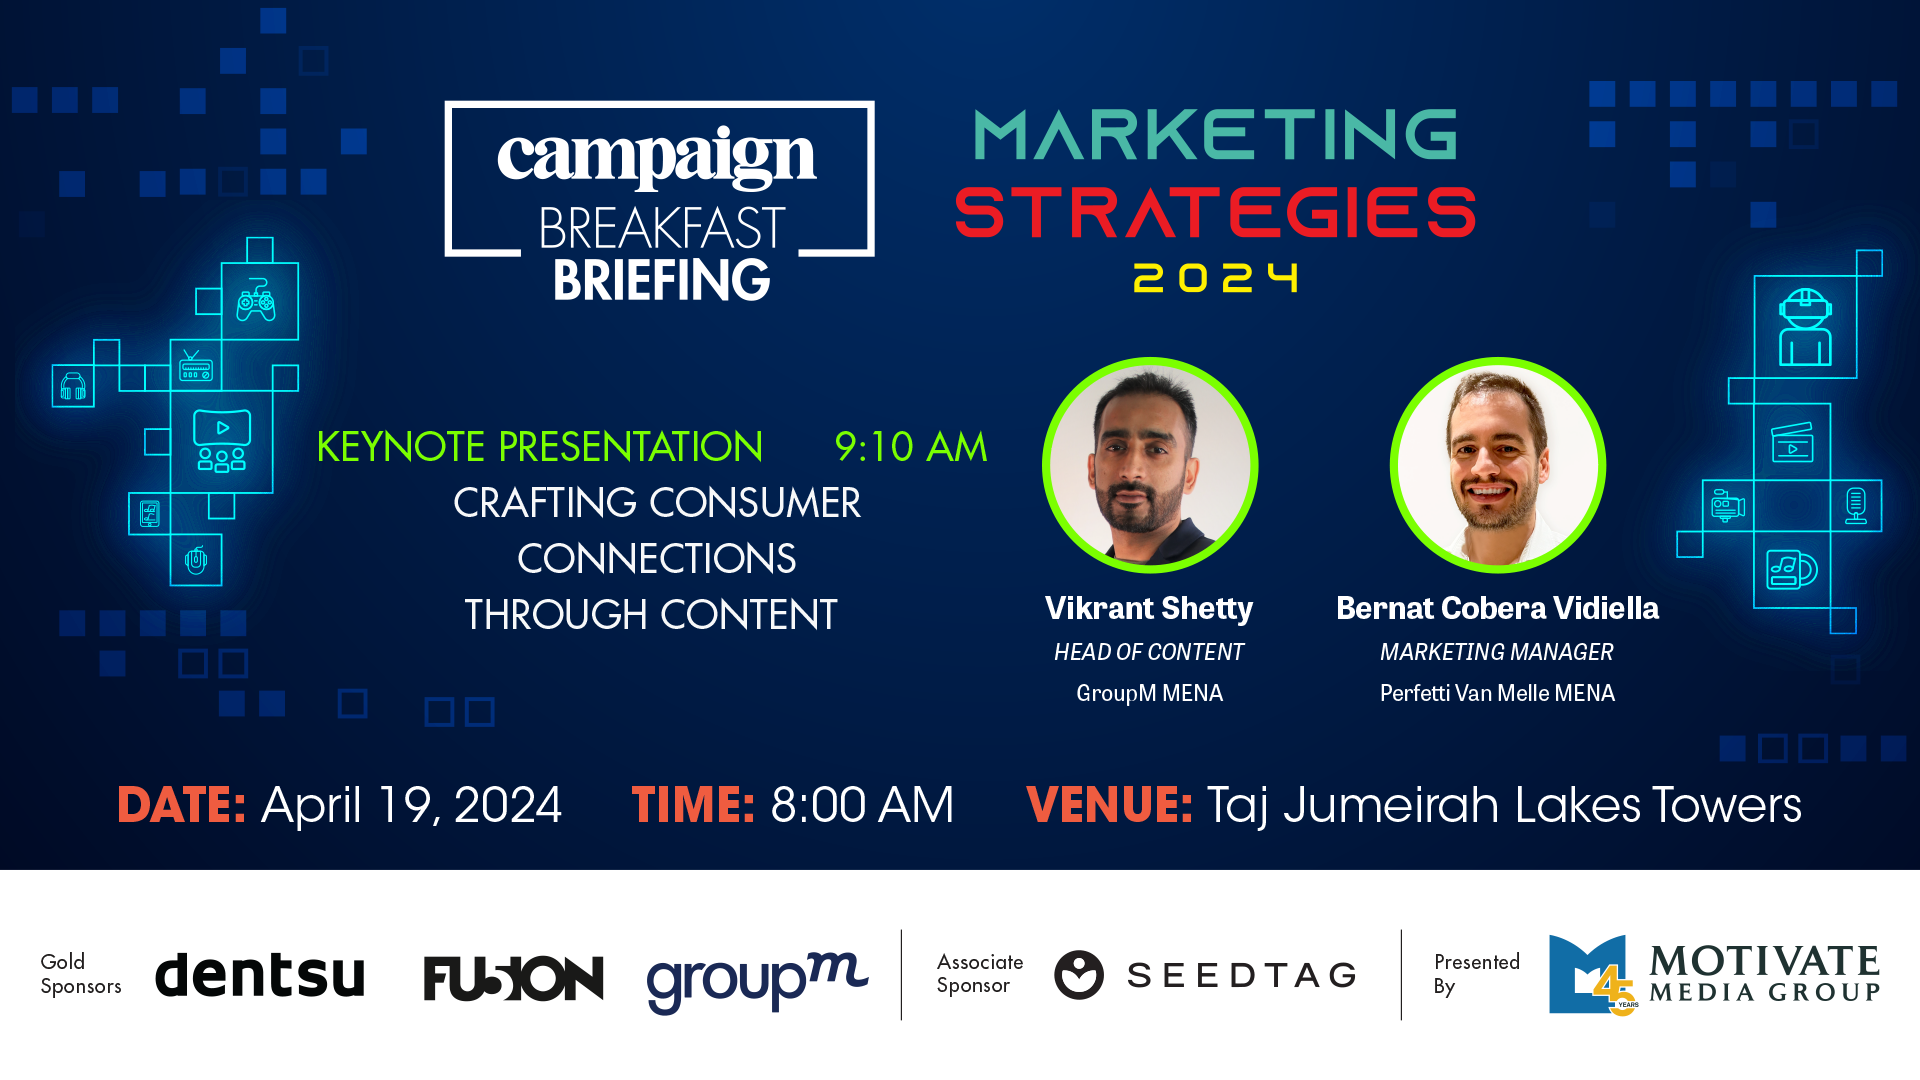 The wait is over, Campaign Breakfast Briefing Marketing Strategies event is here!